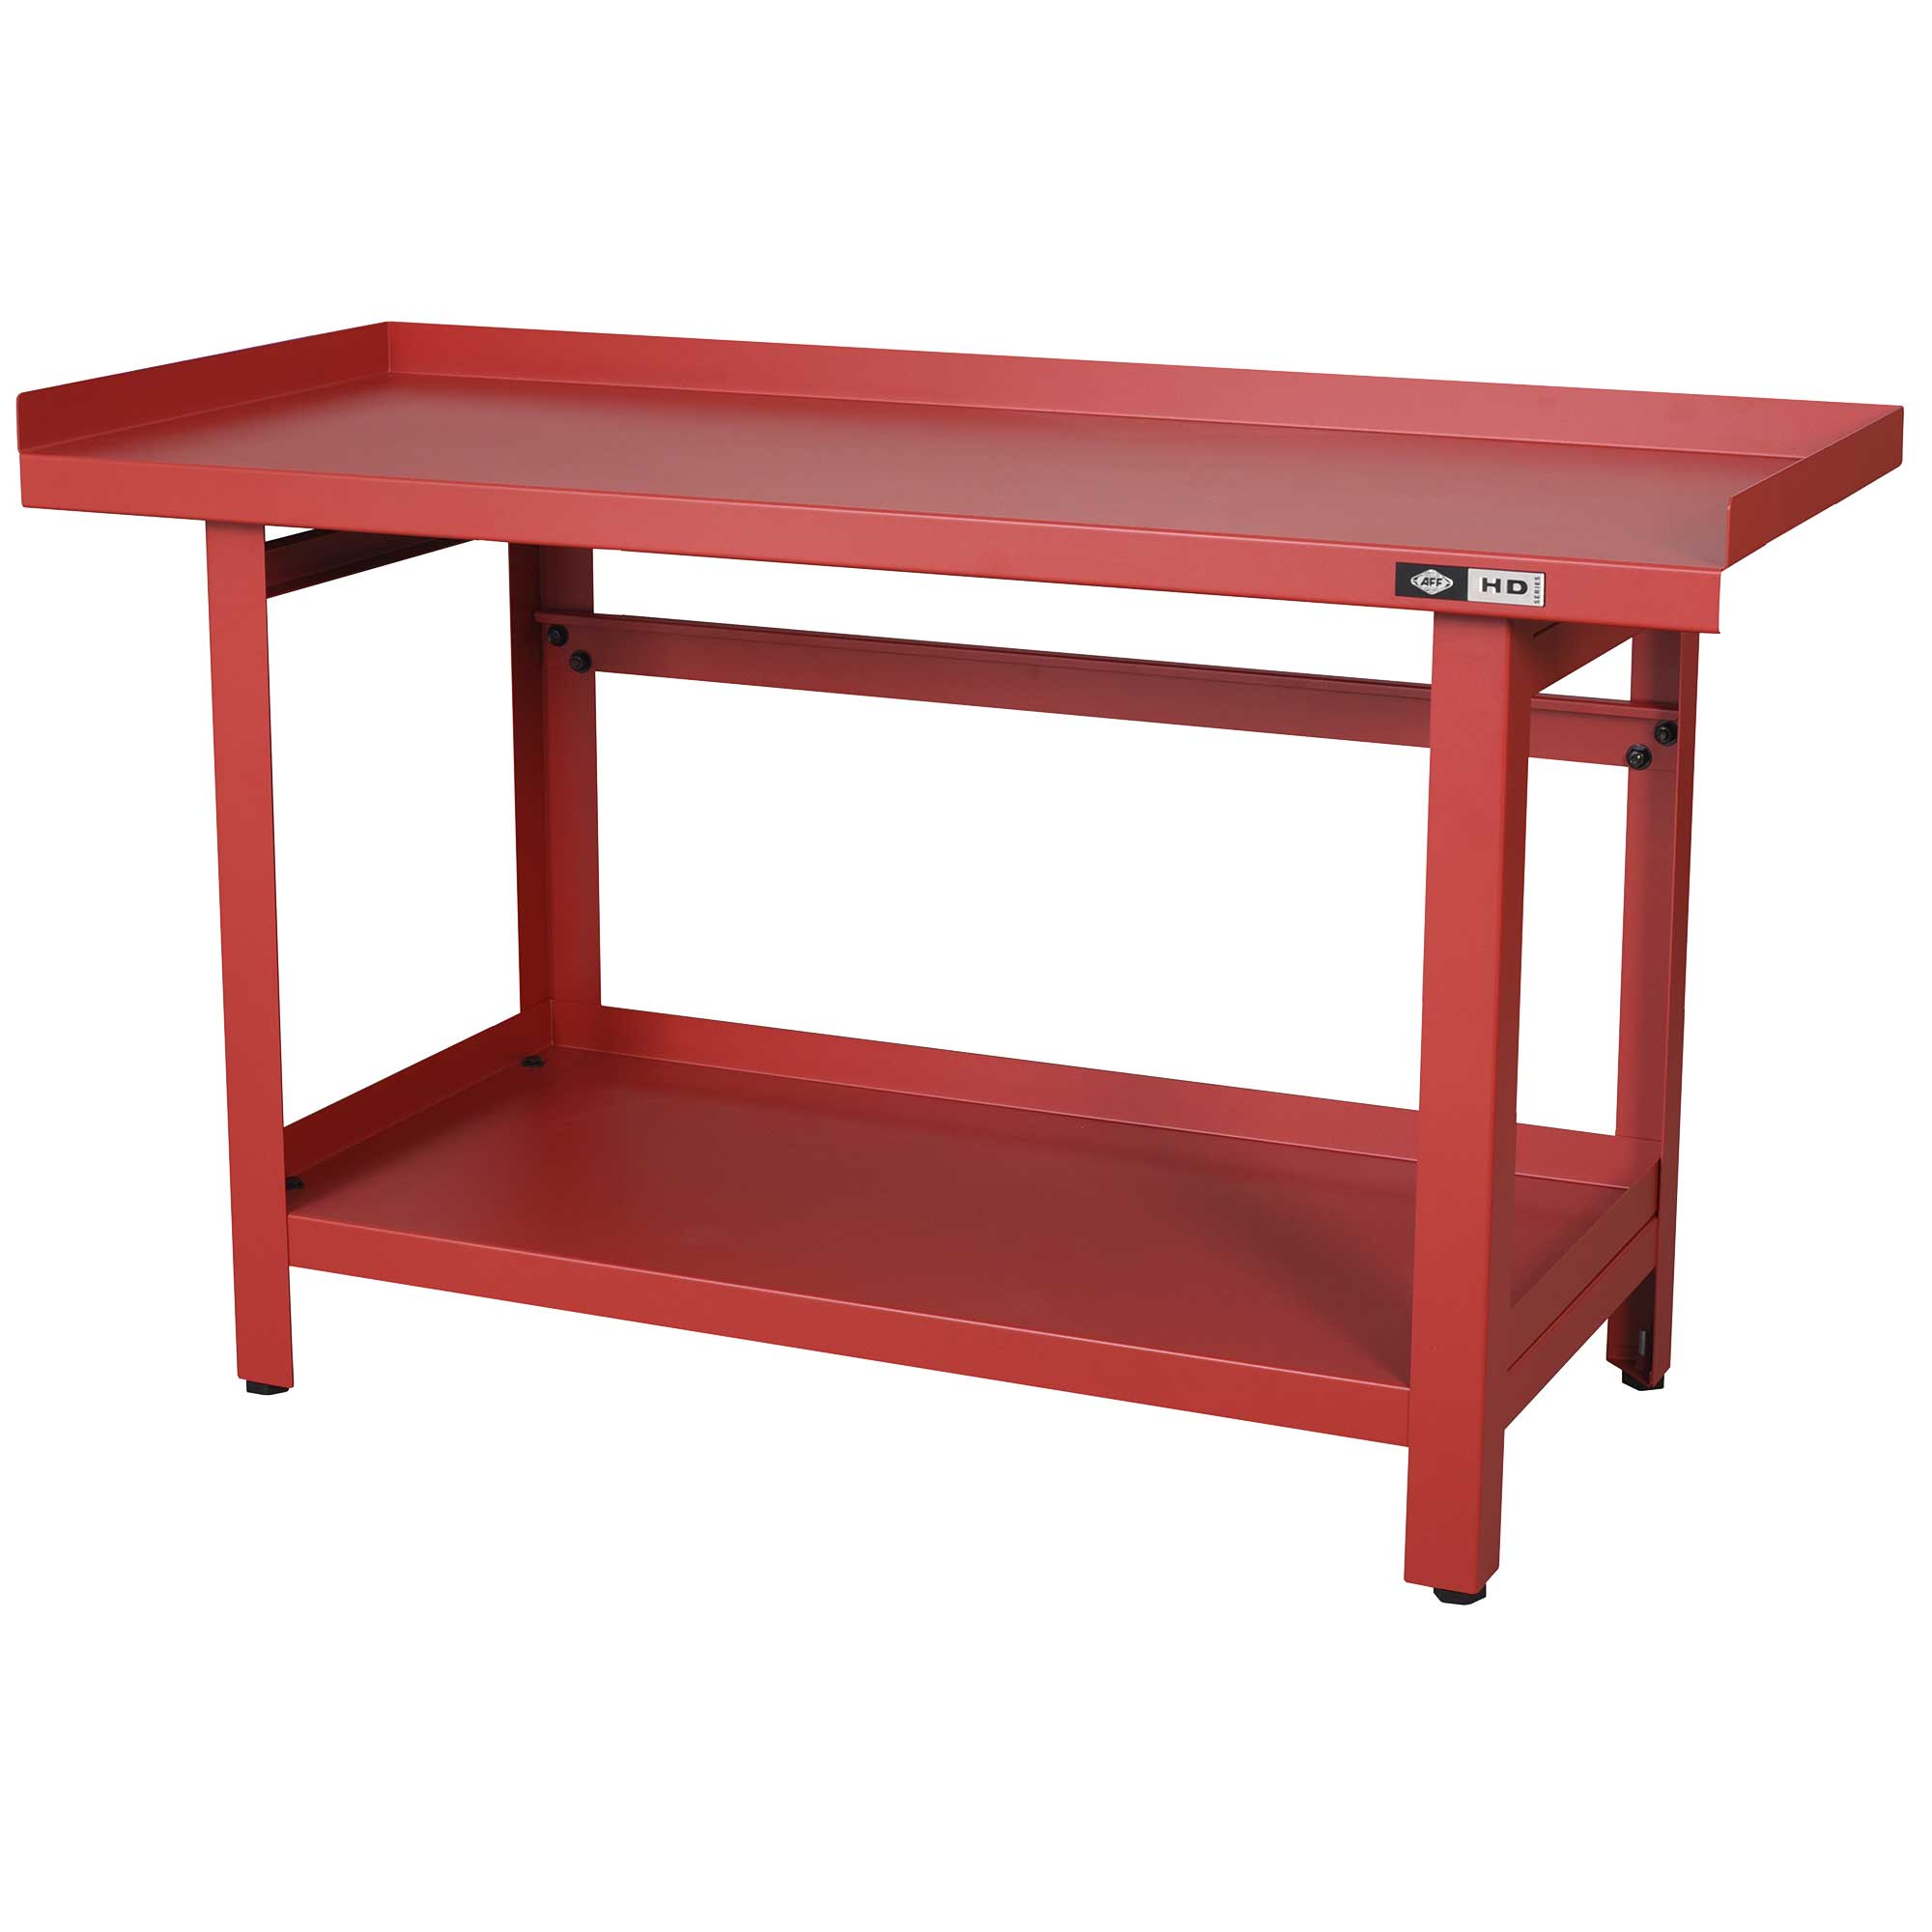 American Forge and Foundry - Heavy-Duty Workbench -  3990